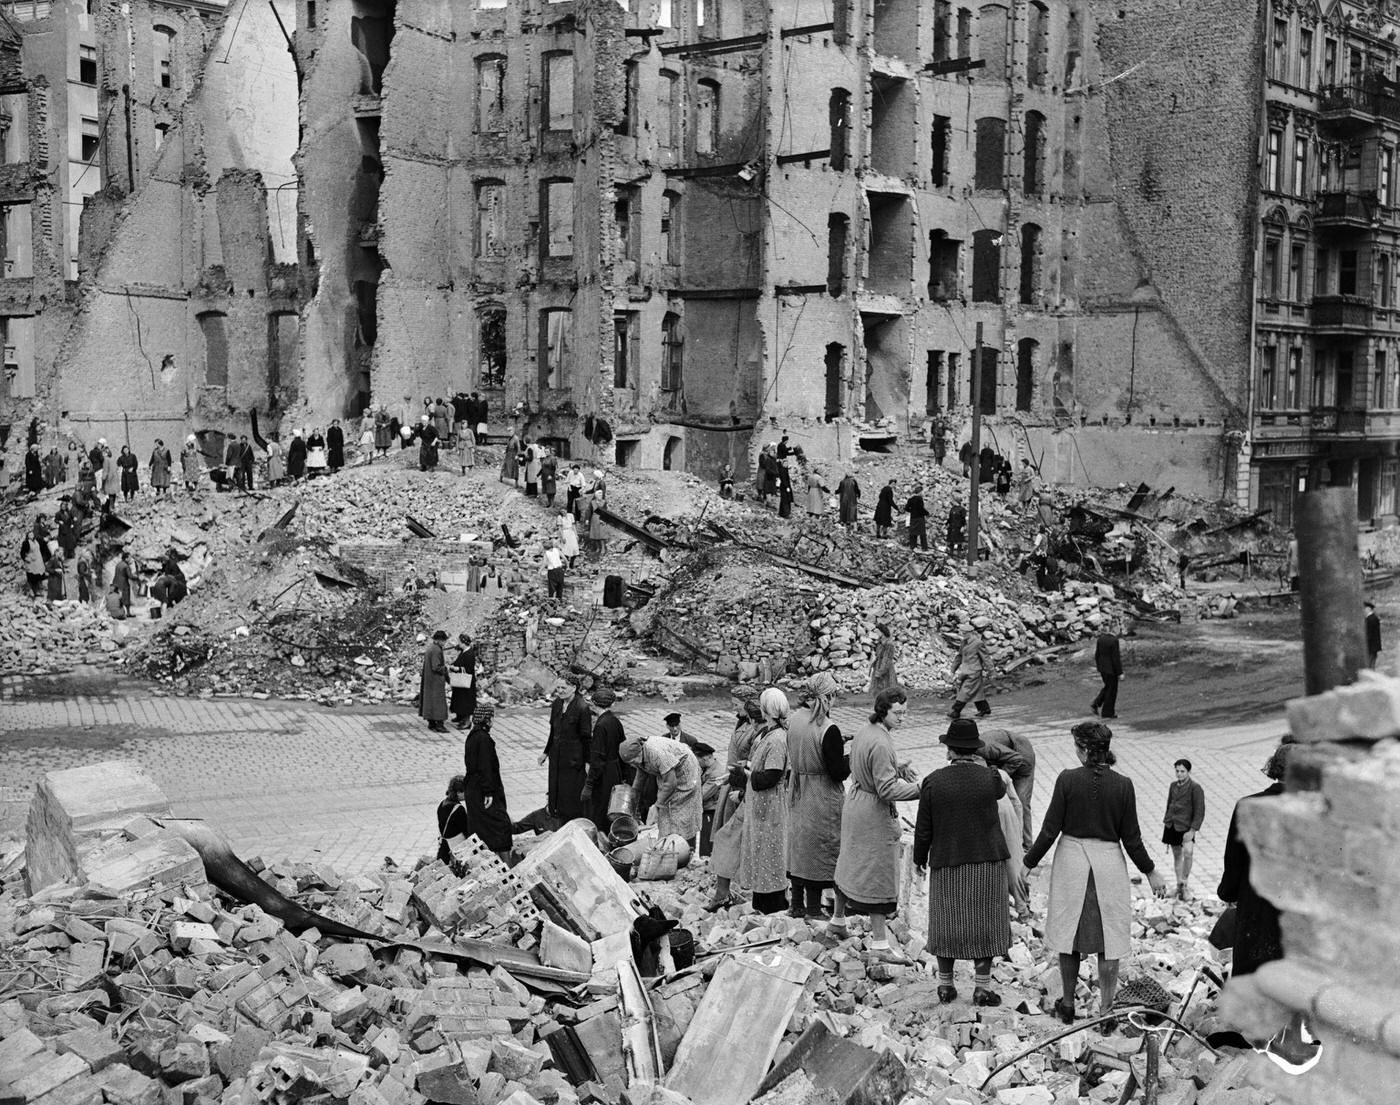 Berlin women work in a 'chain gang' to clear rubble in the war-torn city.